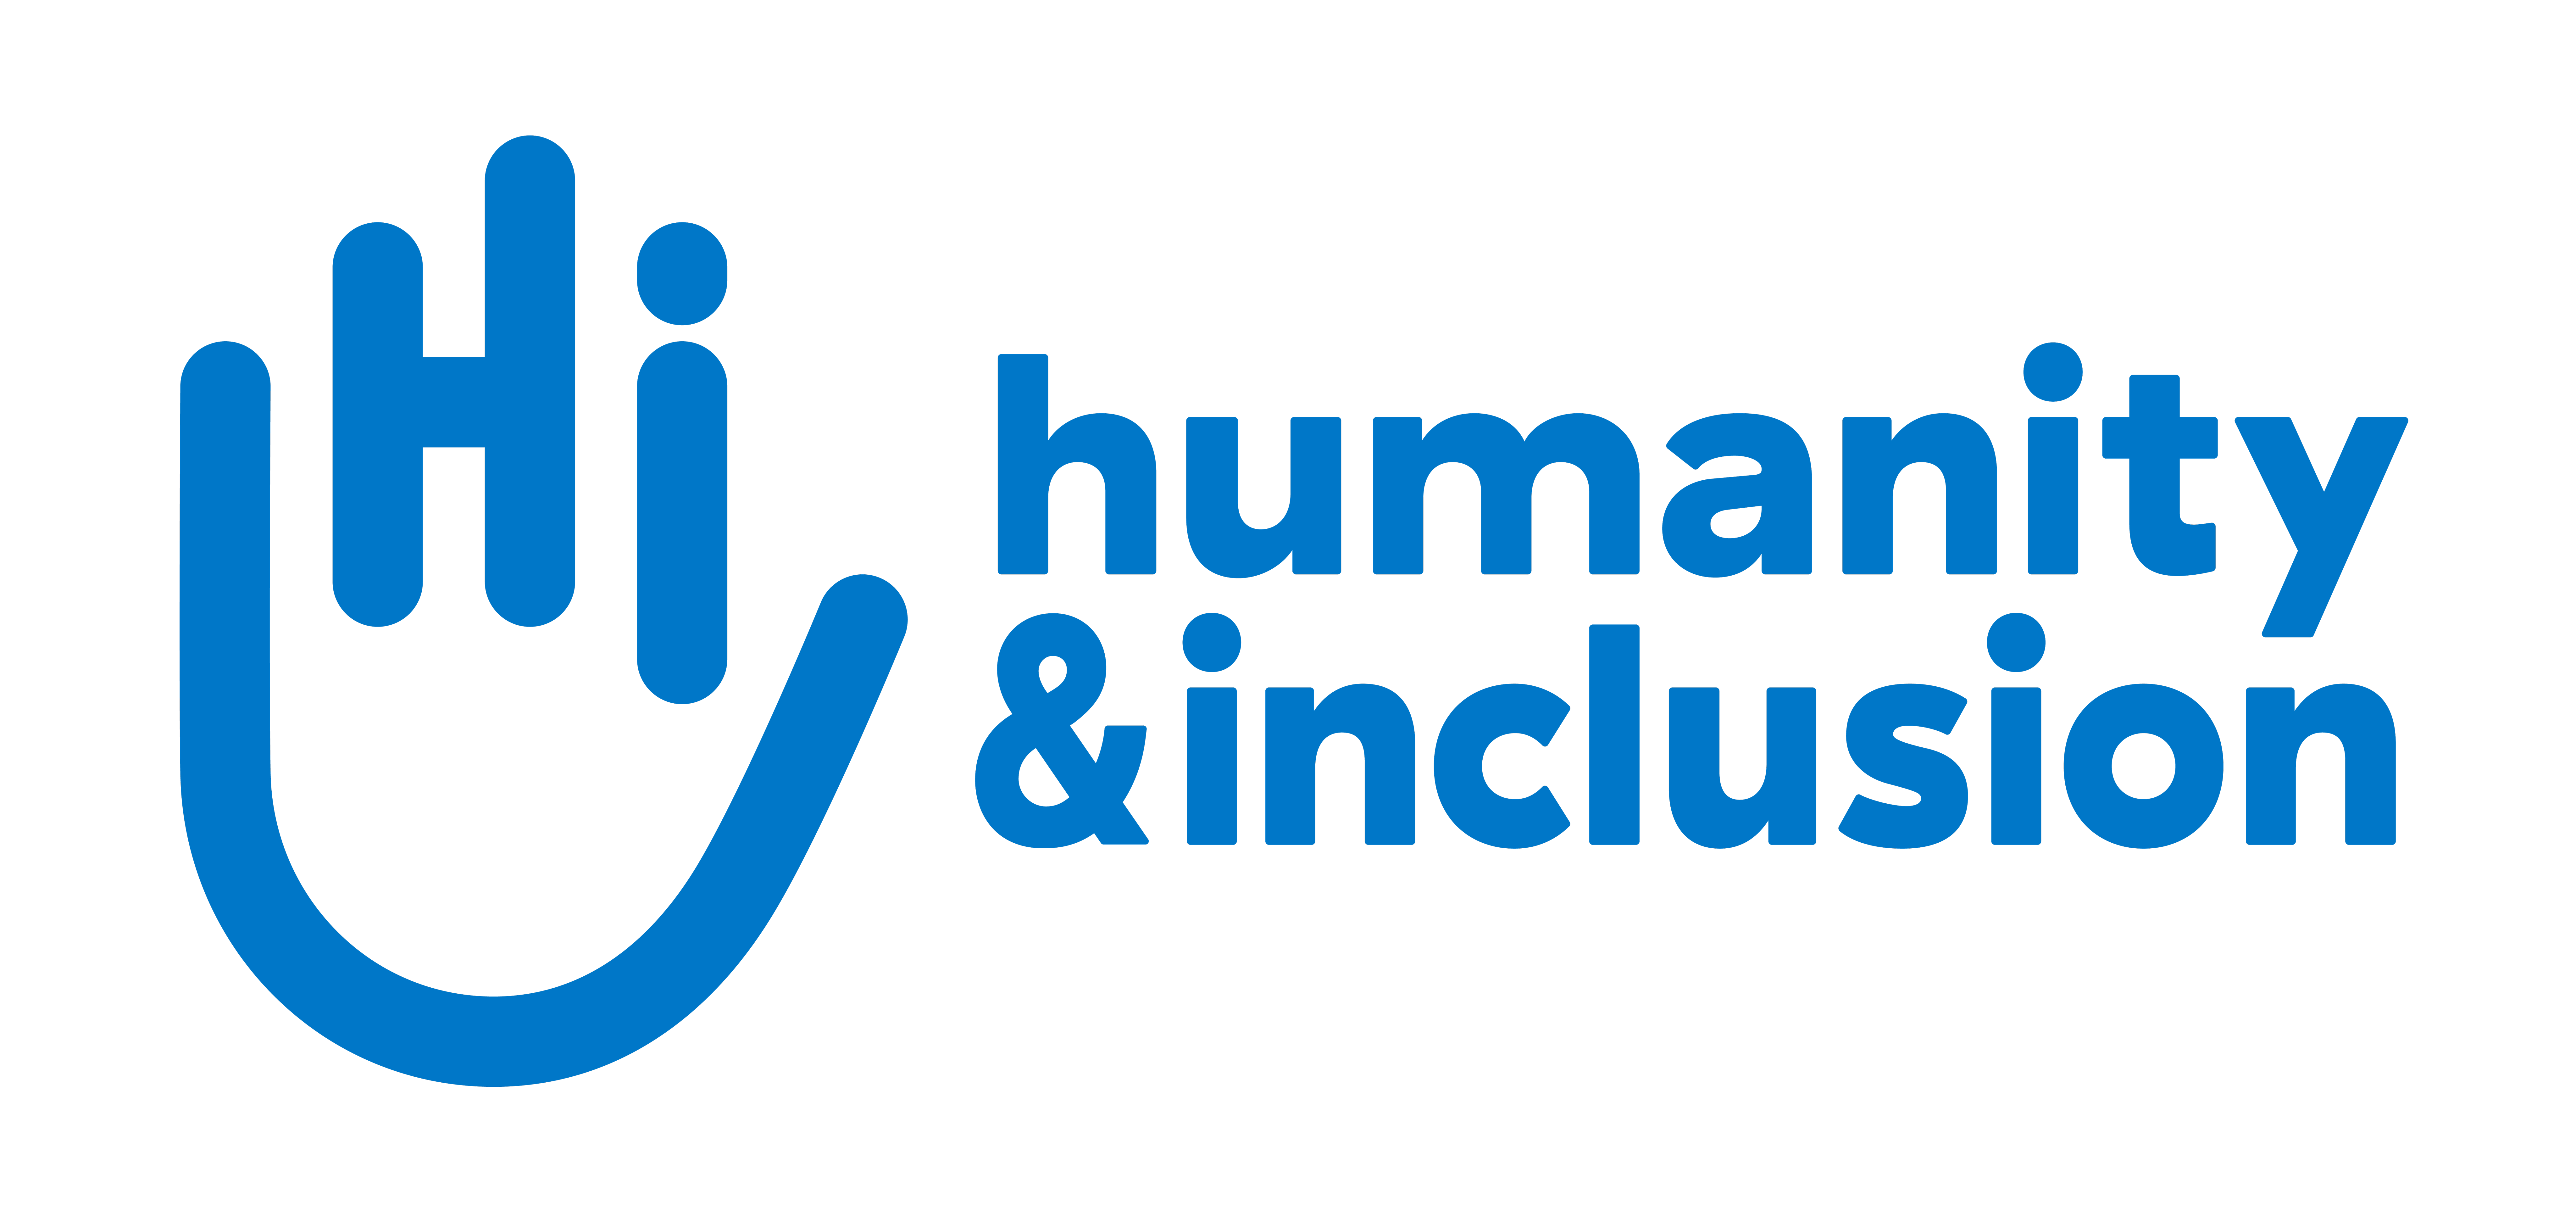 The Humanity & Inclusion logo contains a dark blue hand. It is meant to symbolize transcending language and culture. Next to the hand are the words “humanity and inclusion.”